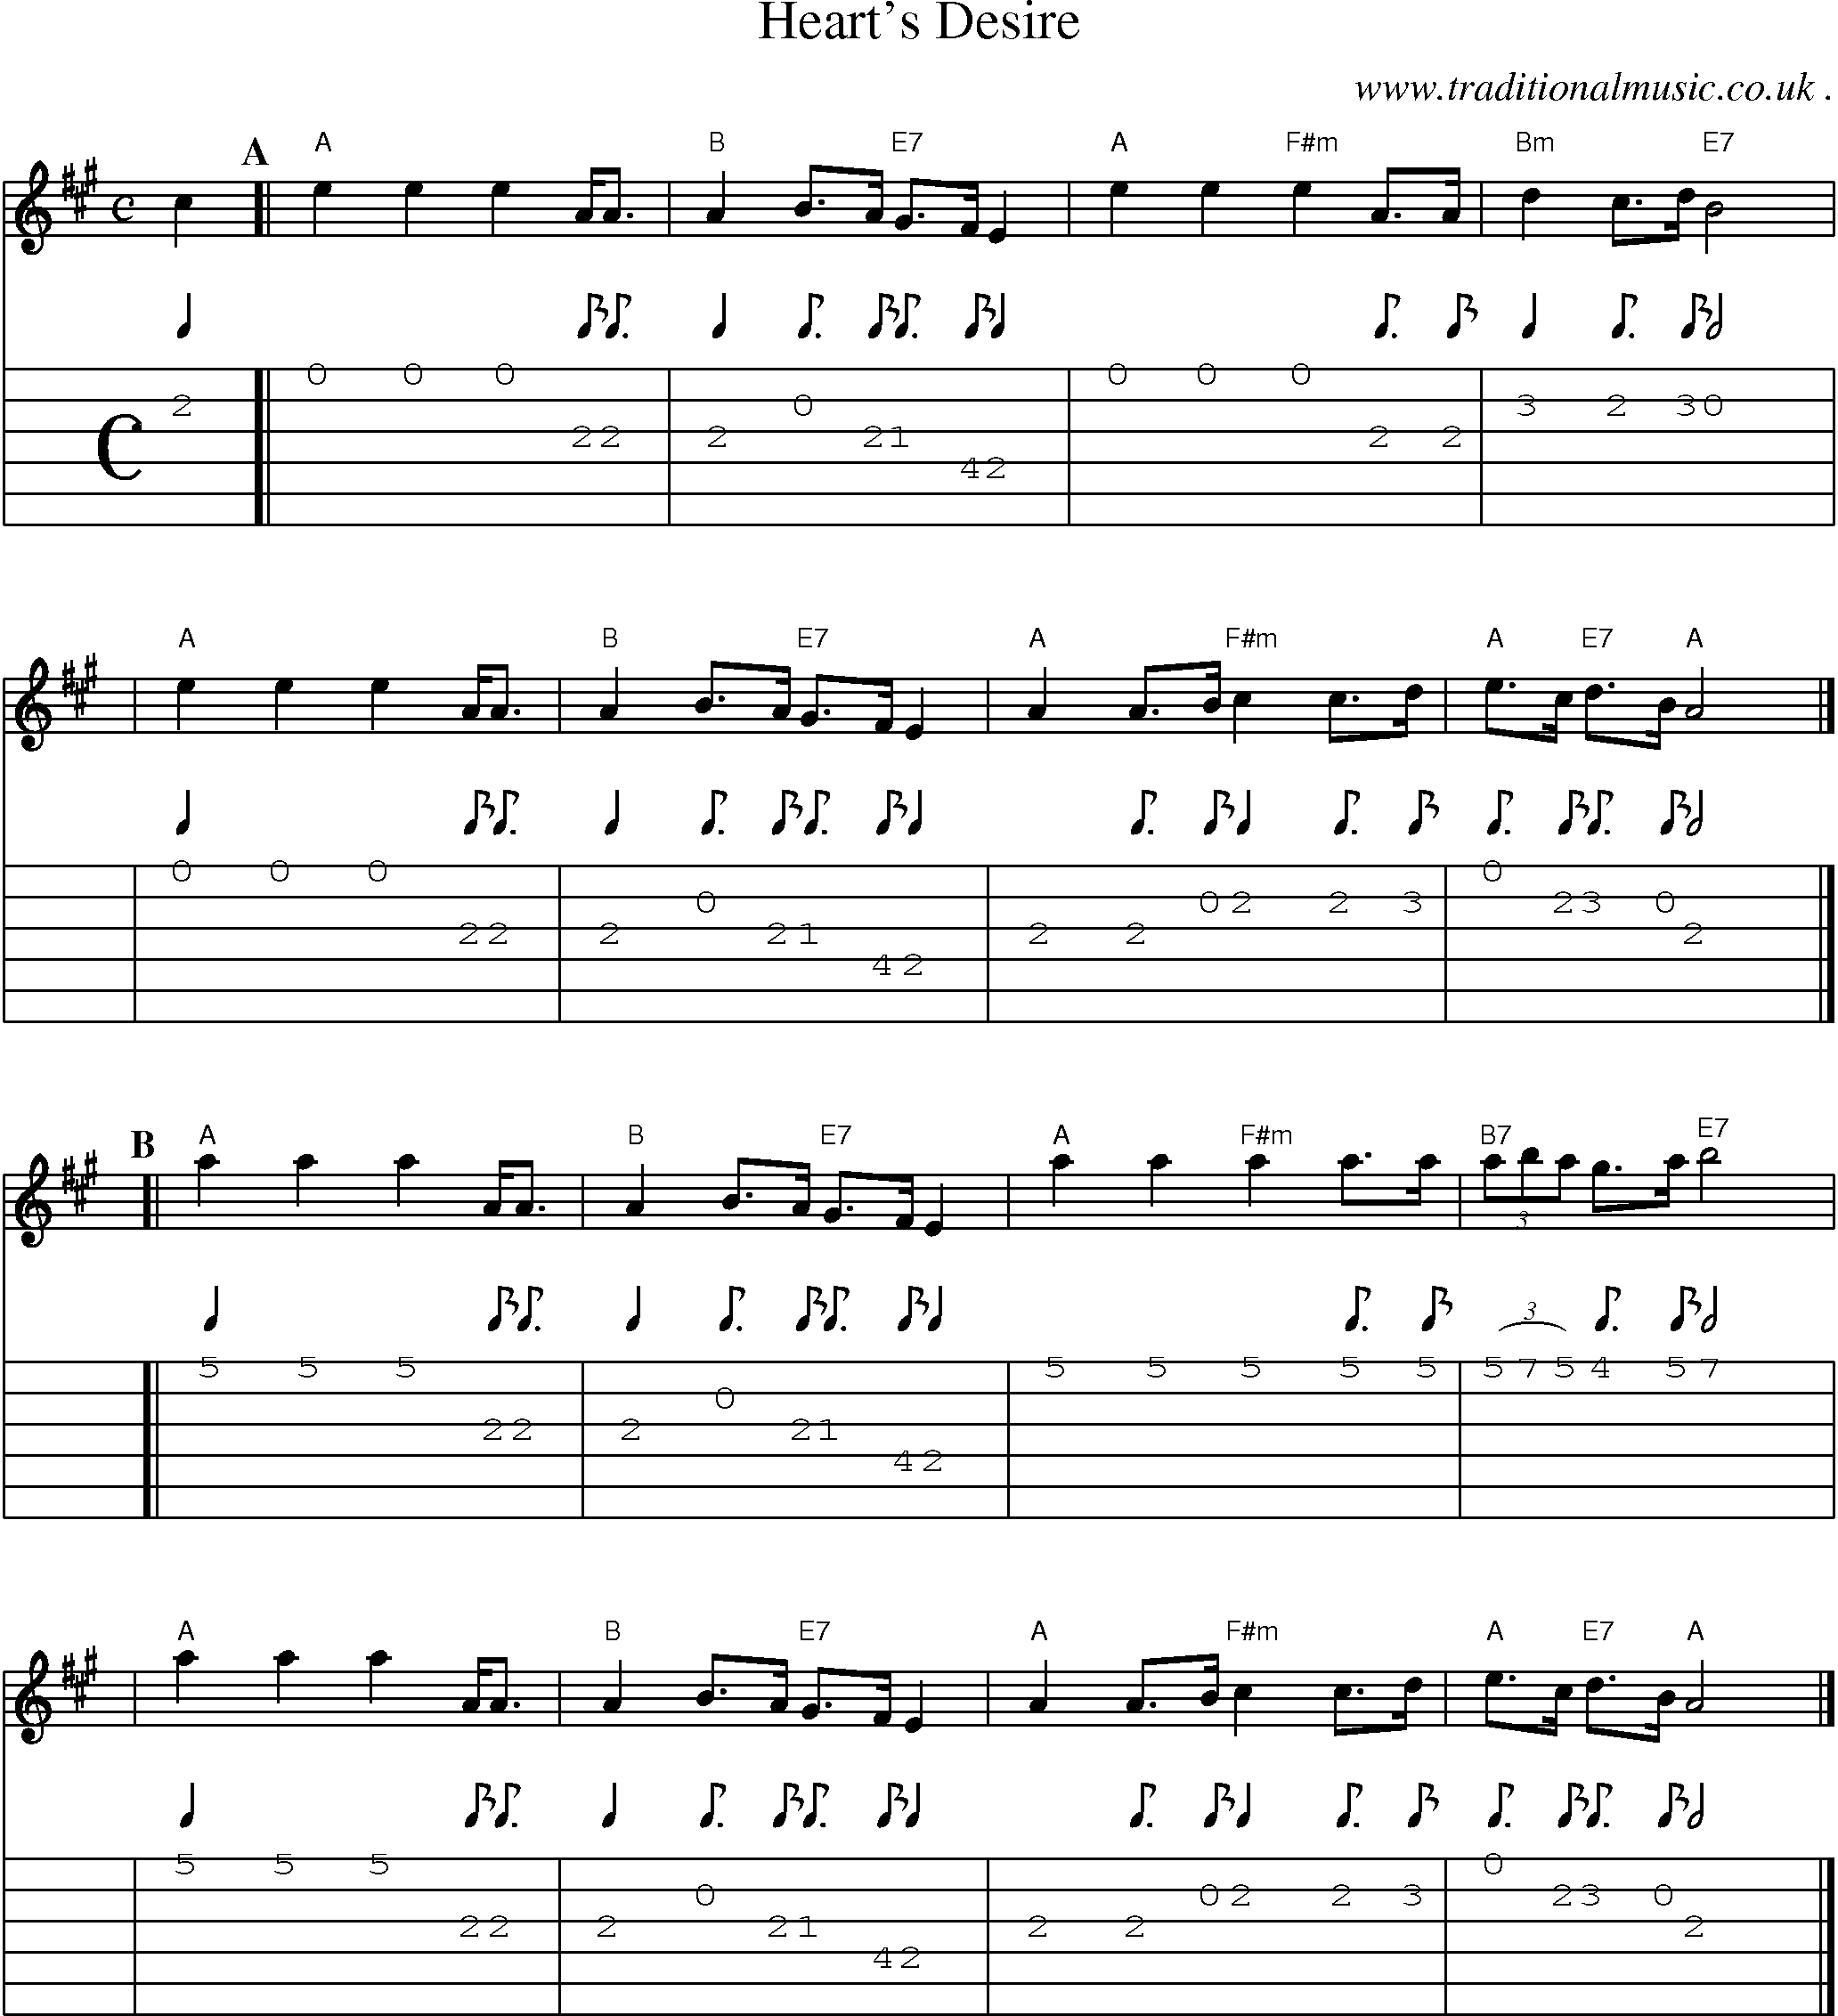 Sheet-music  score, Chords and Guitar Tabs for Hearts Desire